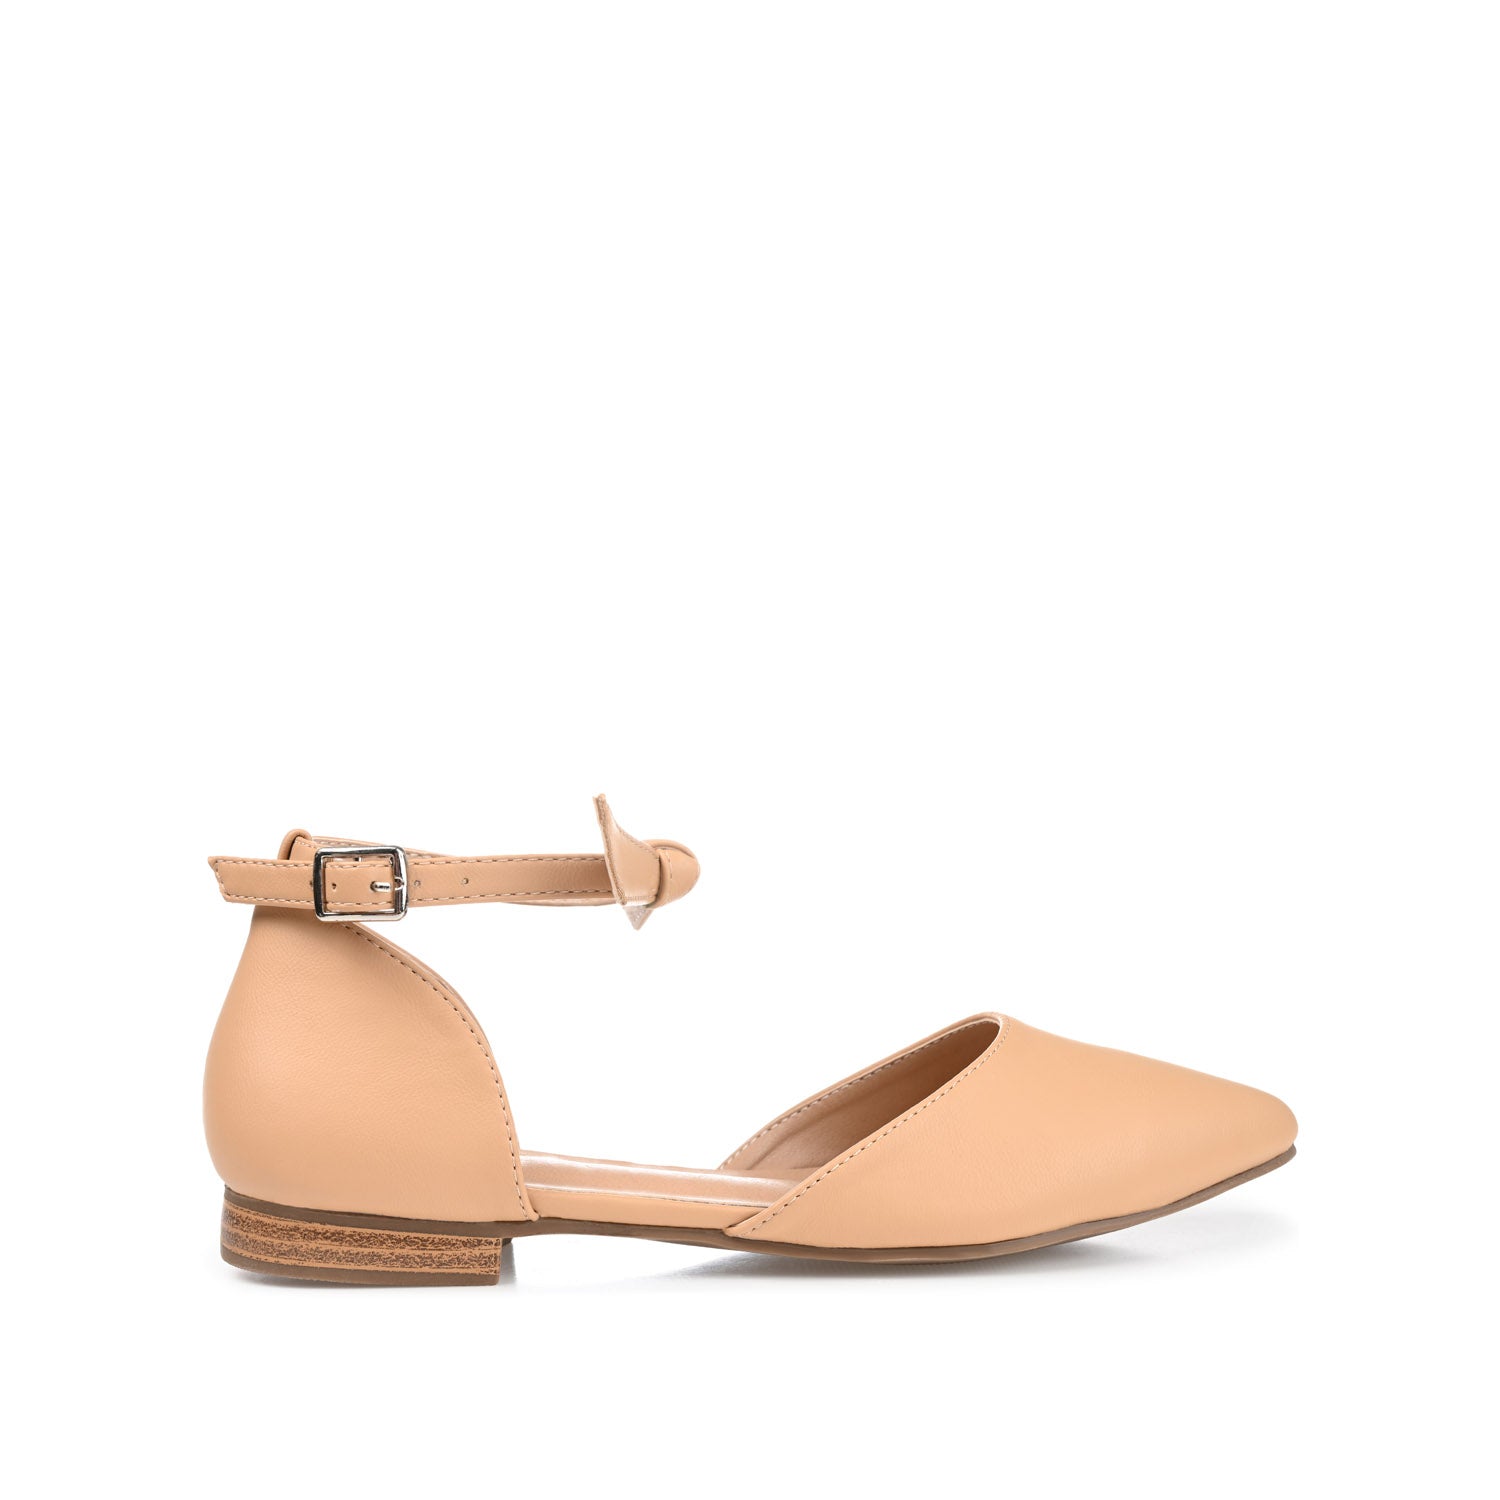 VIELO D'ORSAY FLATS IN FAUX LEATHER